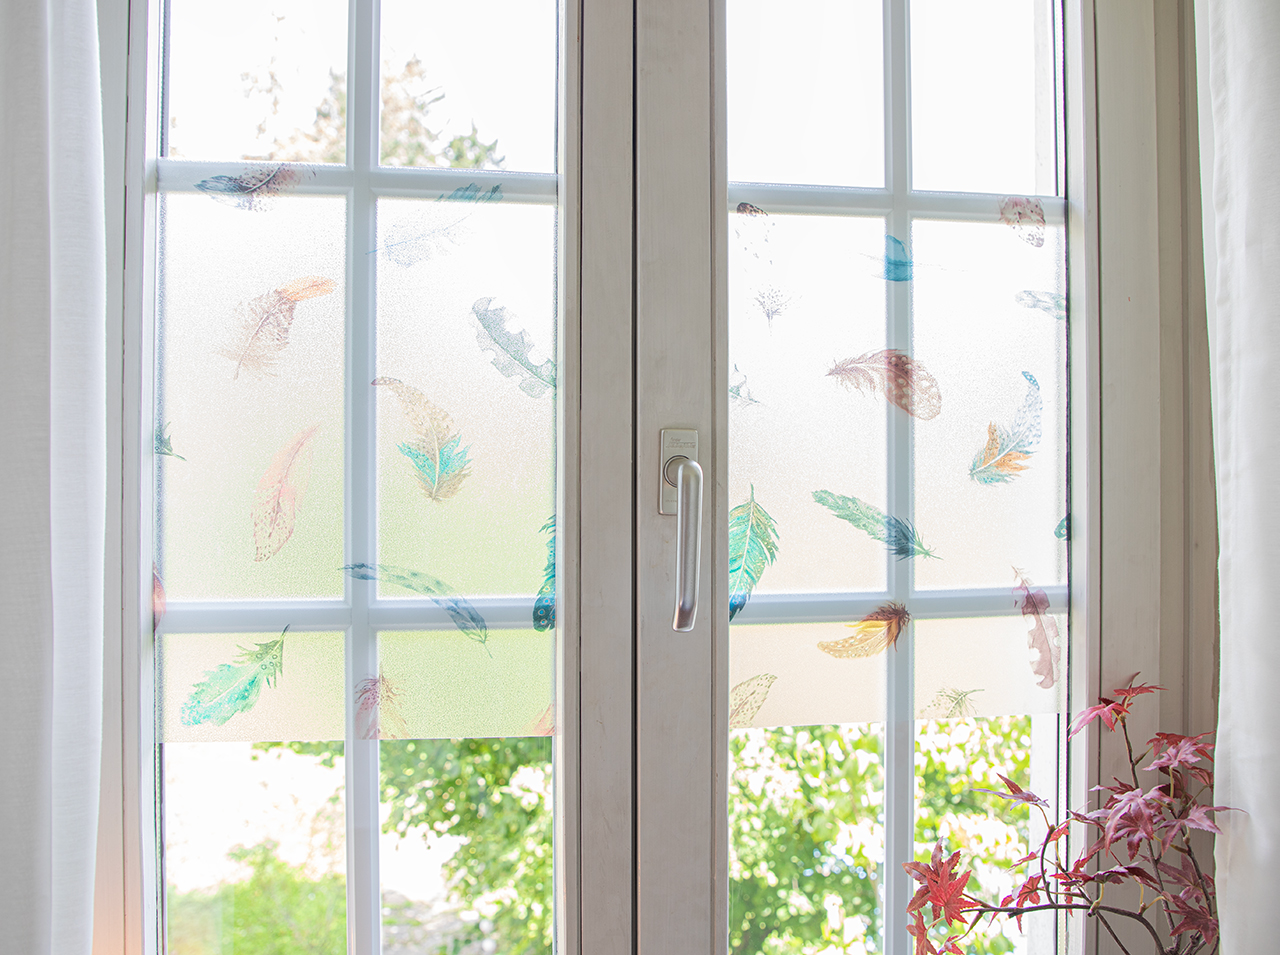 Window pane pasted with privacy foil with colorful photorealistic feathers